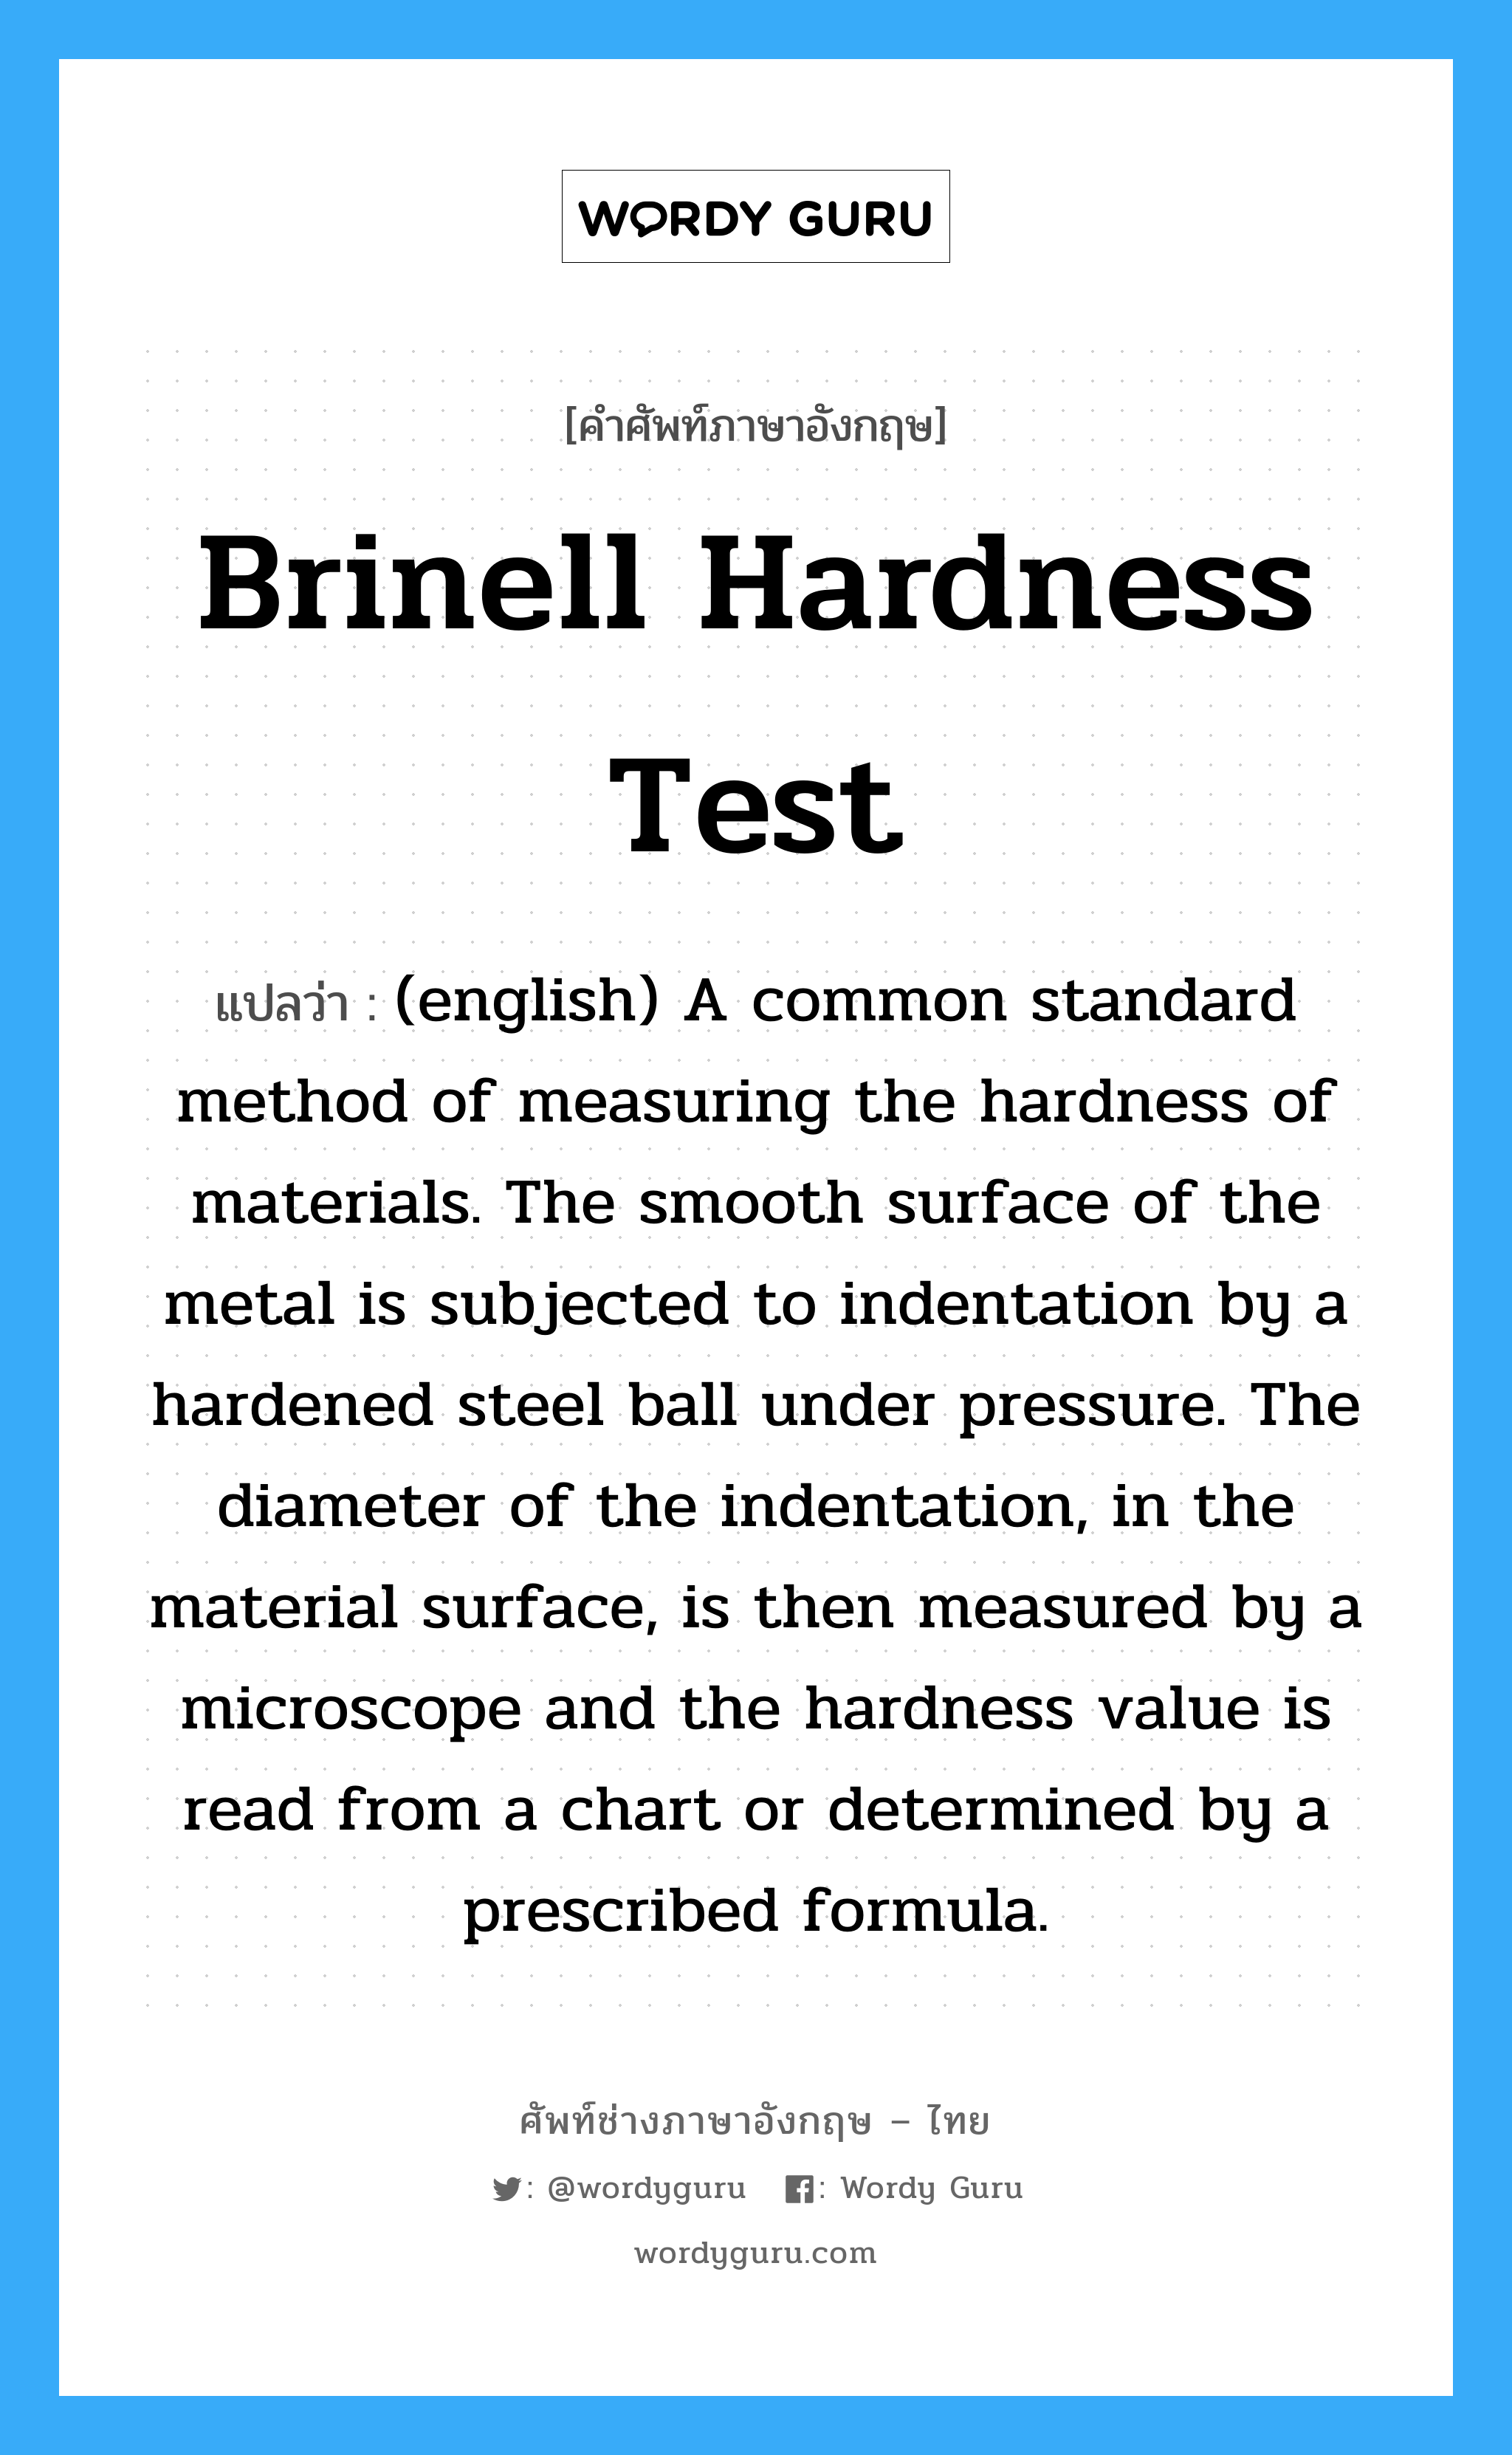 (english) A common standard method of measuring the hardness of materials. The smooth surface of the metal is subjected to indentation by a hardened steel ball under pressure. The diameter of the indentation, in the material surface, is then measured by a microscope and the hardness value is read from a chart or determined by a prescribed formula. ภาษาอังกฤษ?, คำศัพท์ช่างภาษาอังกฤษ - ไทย (english) A common standard method of measuring the hardness of materials. The smooth surface of the metal is subjected to indentation by a hardened steel ball under pressure. The diameter of the indentation, in the material surface, is then measured by a microscope and the hardness value is read from a chart or determined by a prescribed formula. คำศัพท์ภาษาอังกฤษ (english) A common standard method of measuring the hardness of materials. The smooth surface of the metal is subjected to indentation by a hardened steel ball under pressure. The diameter of the indentation, in the material surface, is then measured by a microscope and the hardness value is read from a chart or determined by a prescribed formula. แปลว่า Brinell Hardness Test